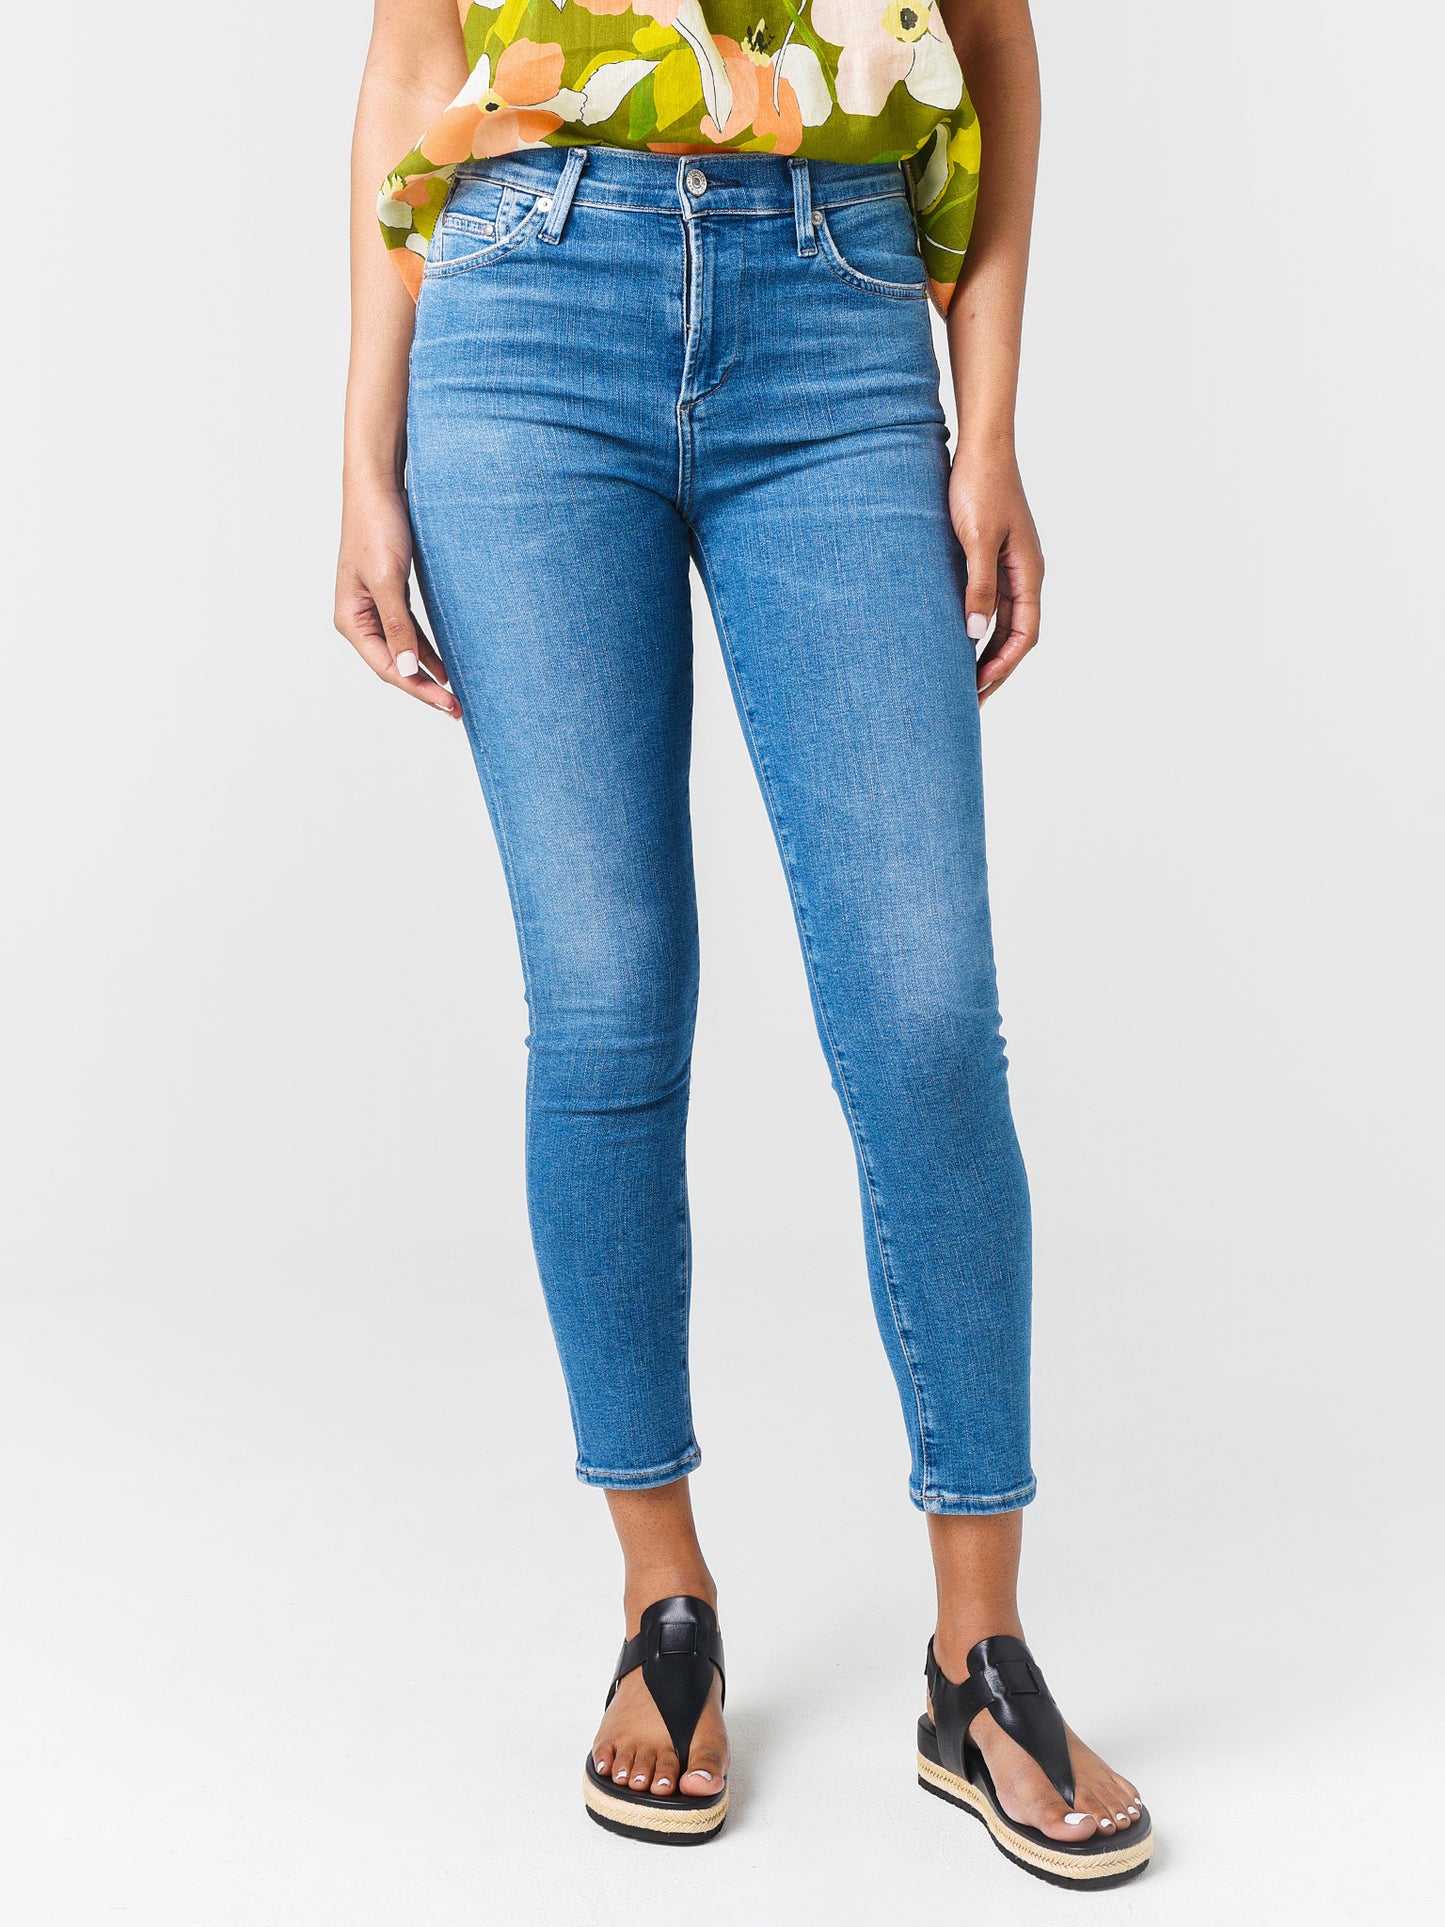 Citizens Of Humanity Women's Rocket Crop Mid-Rise Skinny Fit Jean